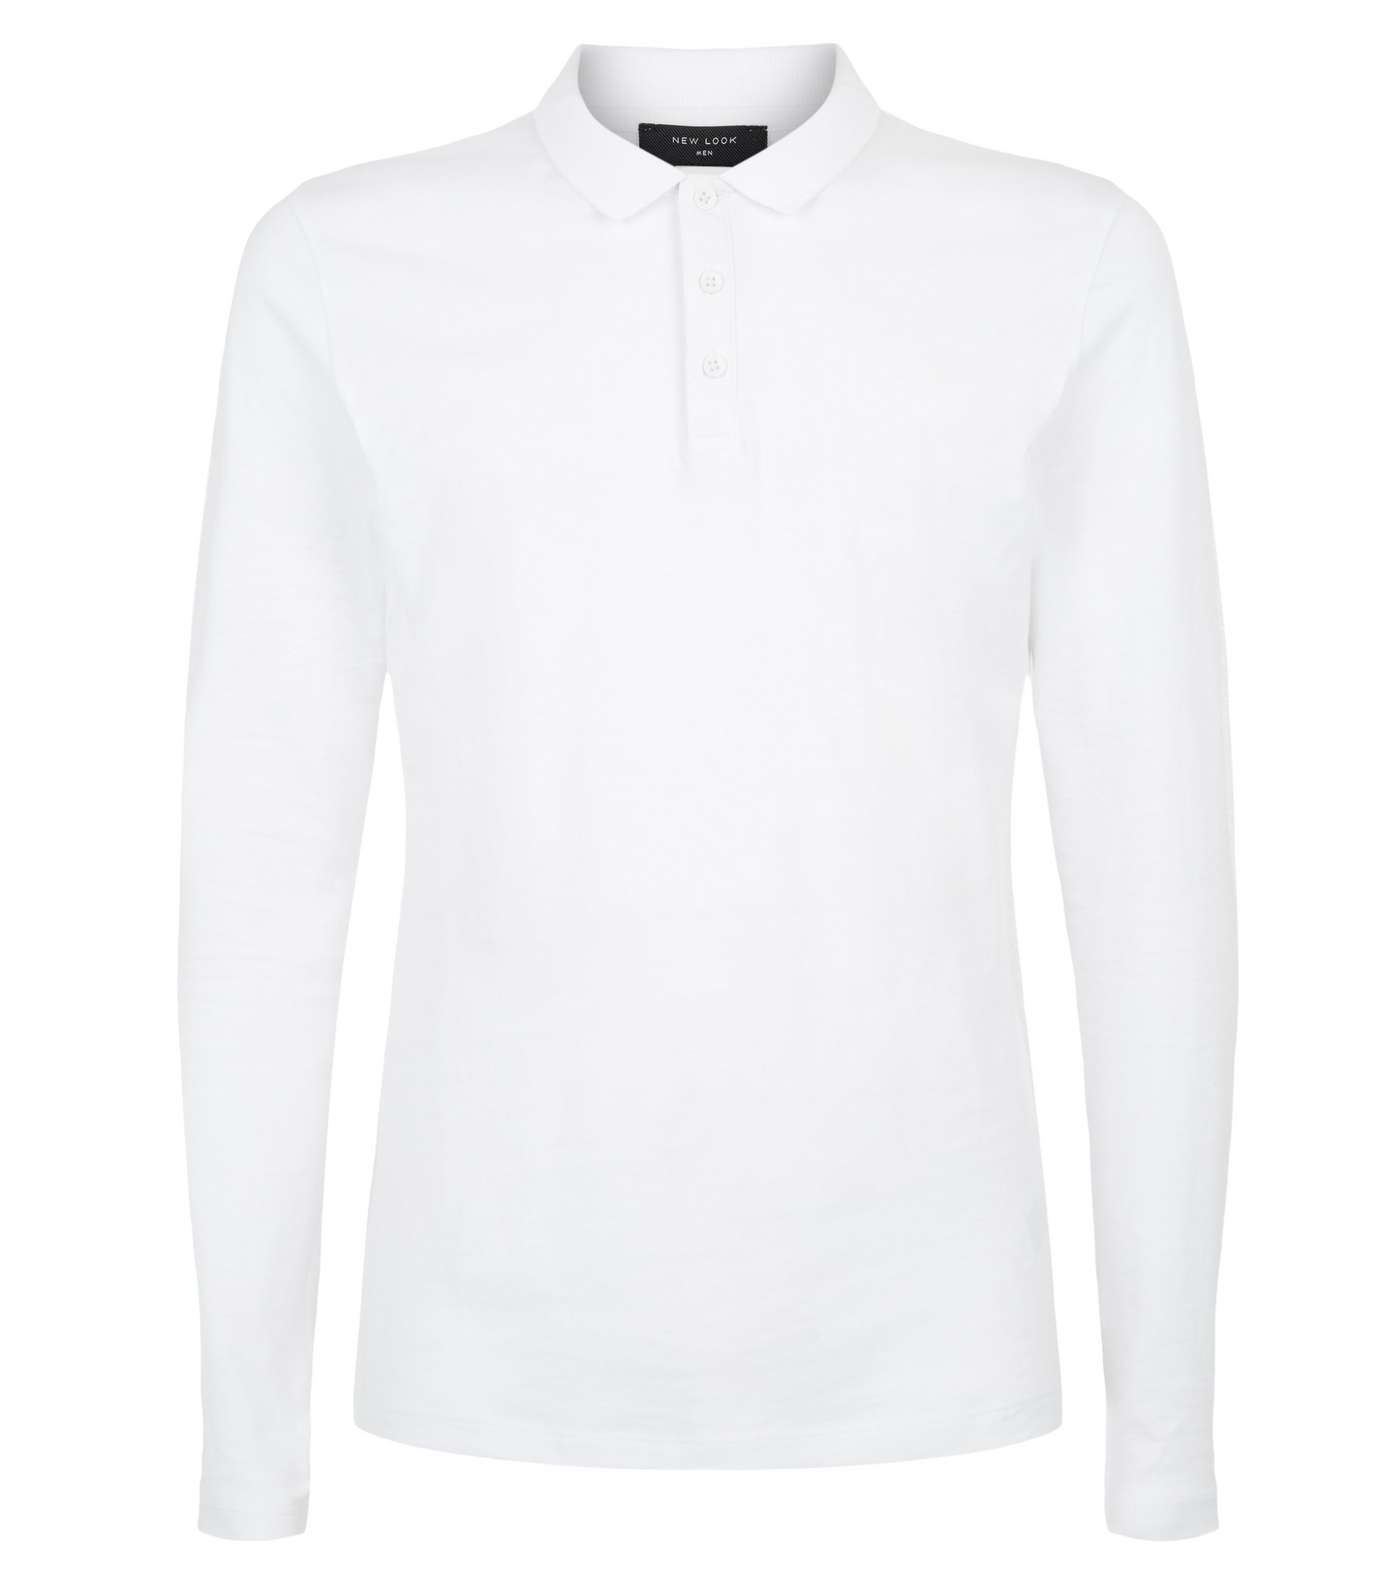 White Long Sleeve Muscle Fit Polo Shirt Image 4